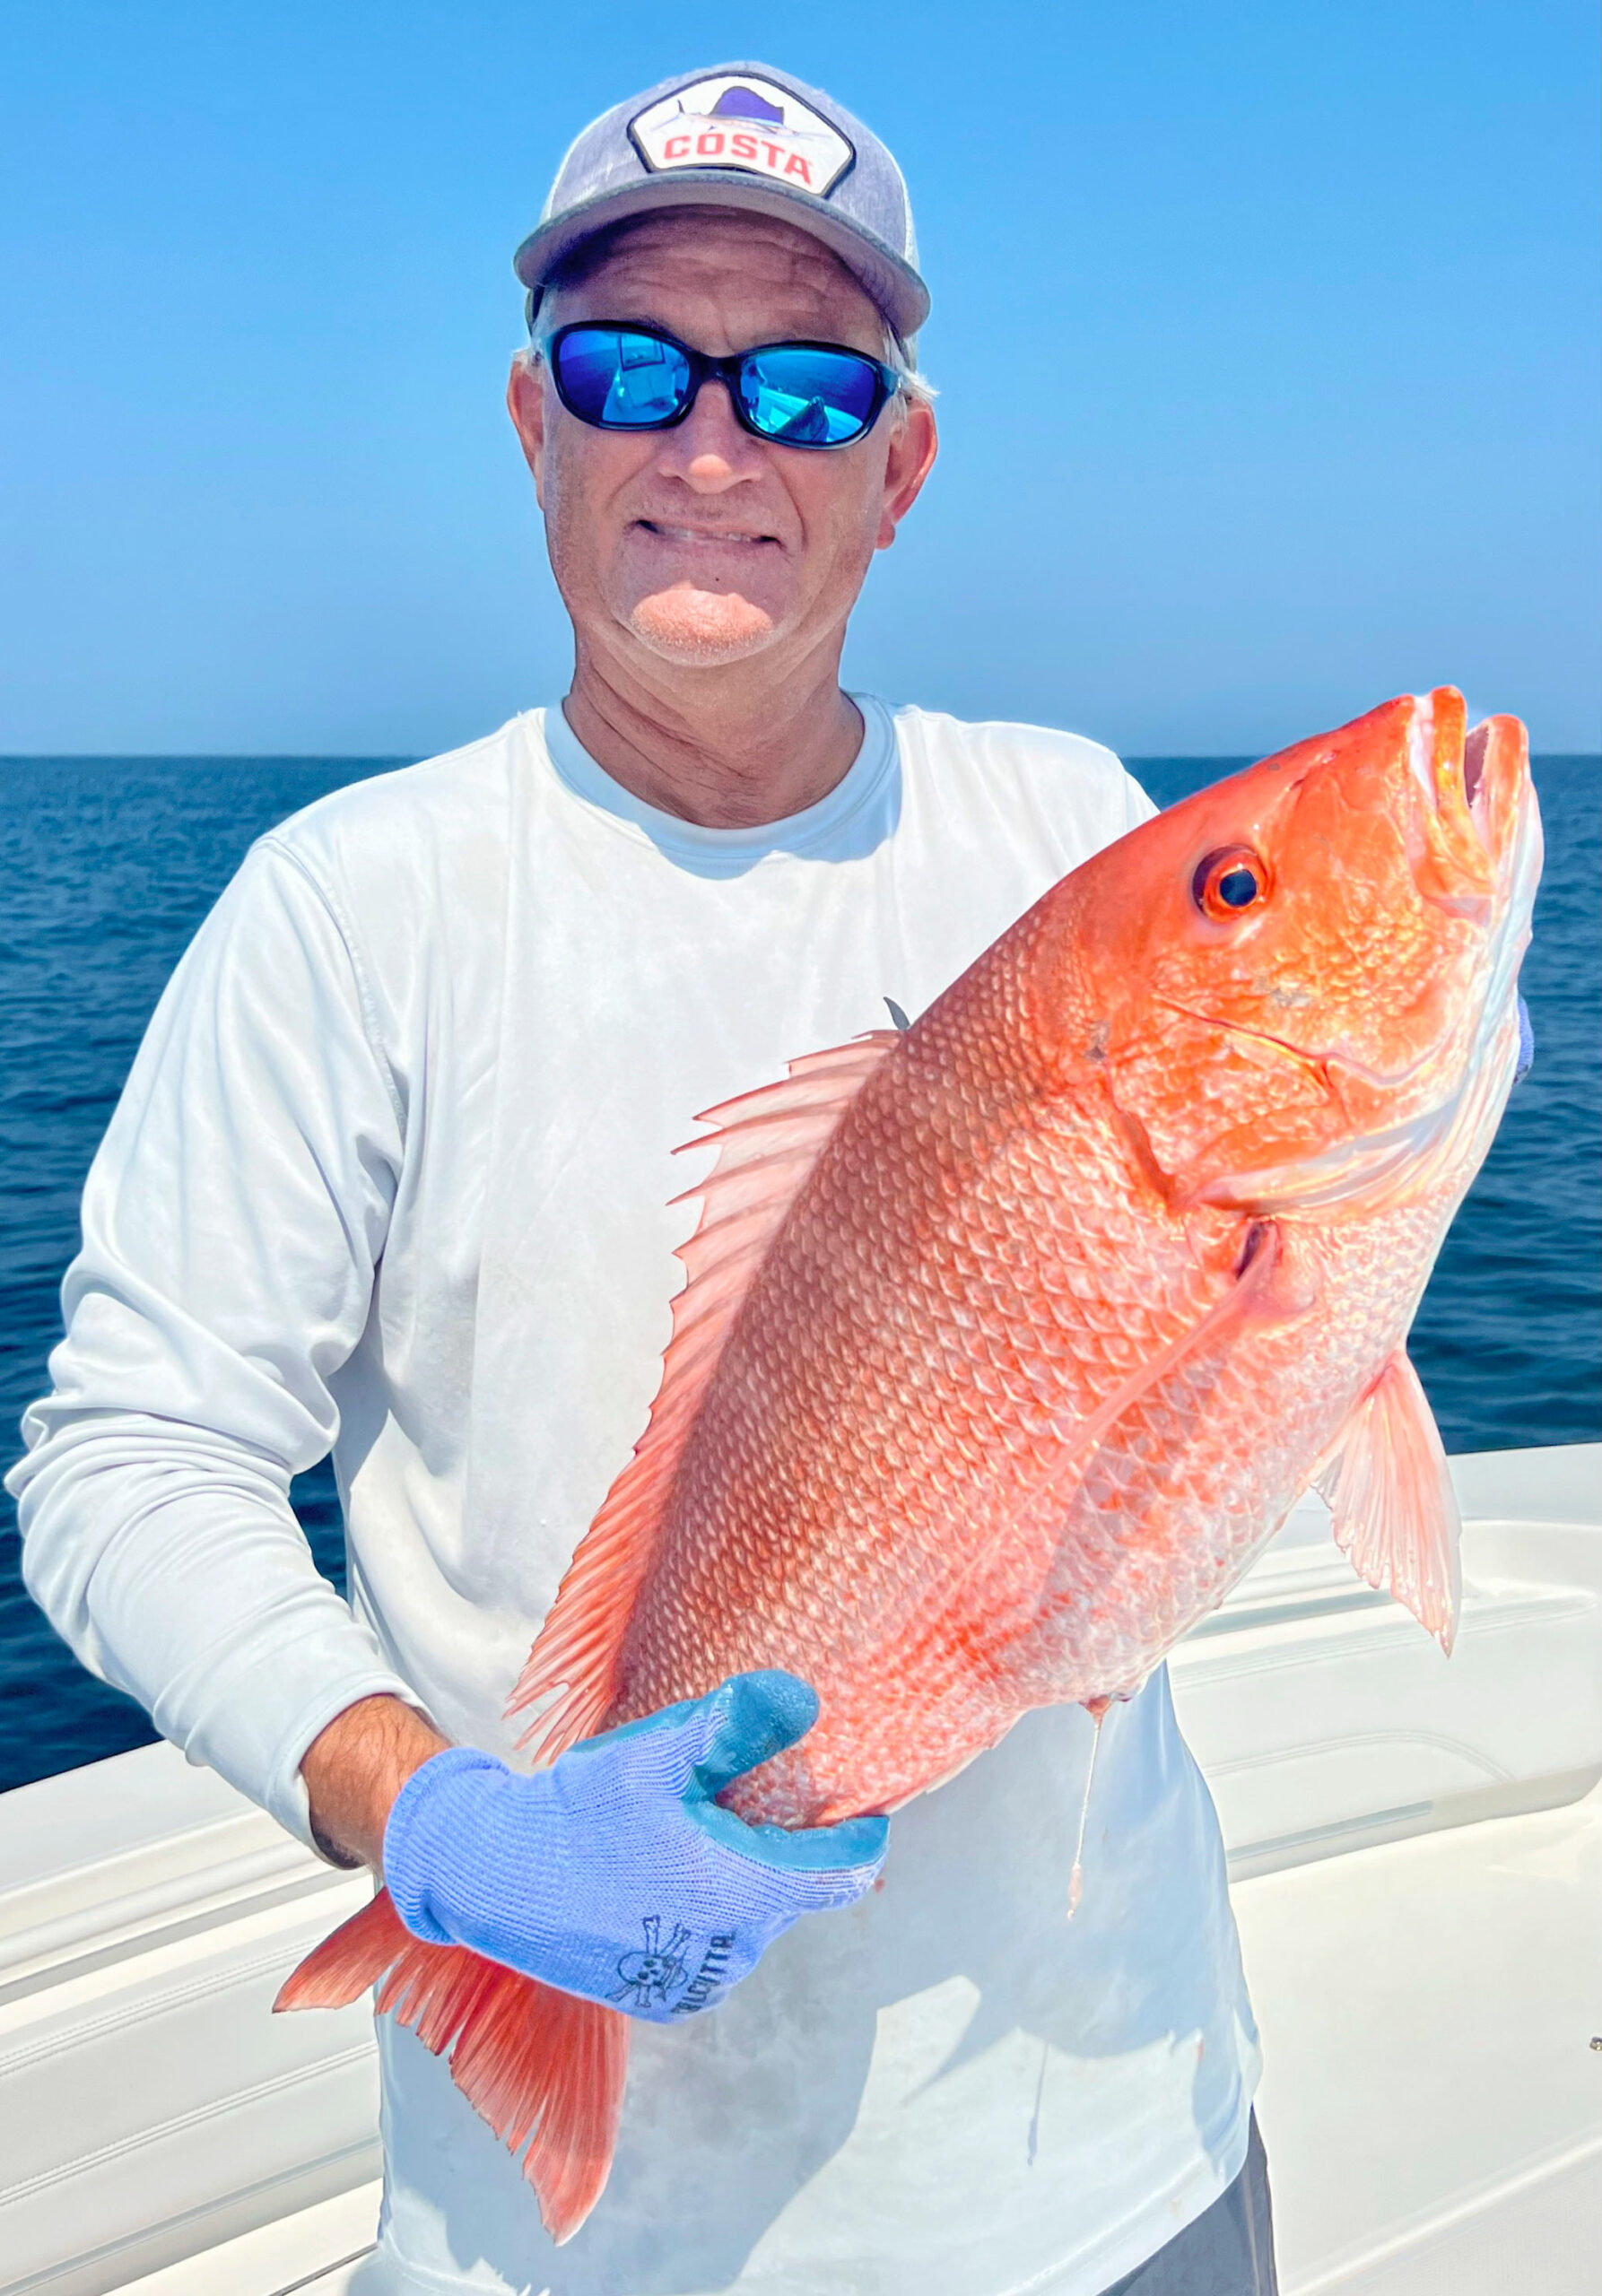 David Ritchie wearing sunglasses and holding a red snapper.